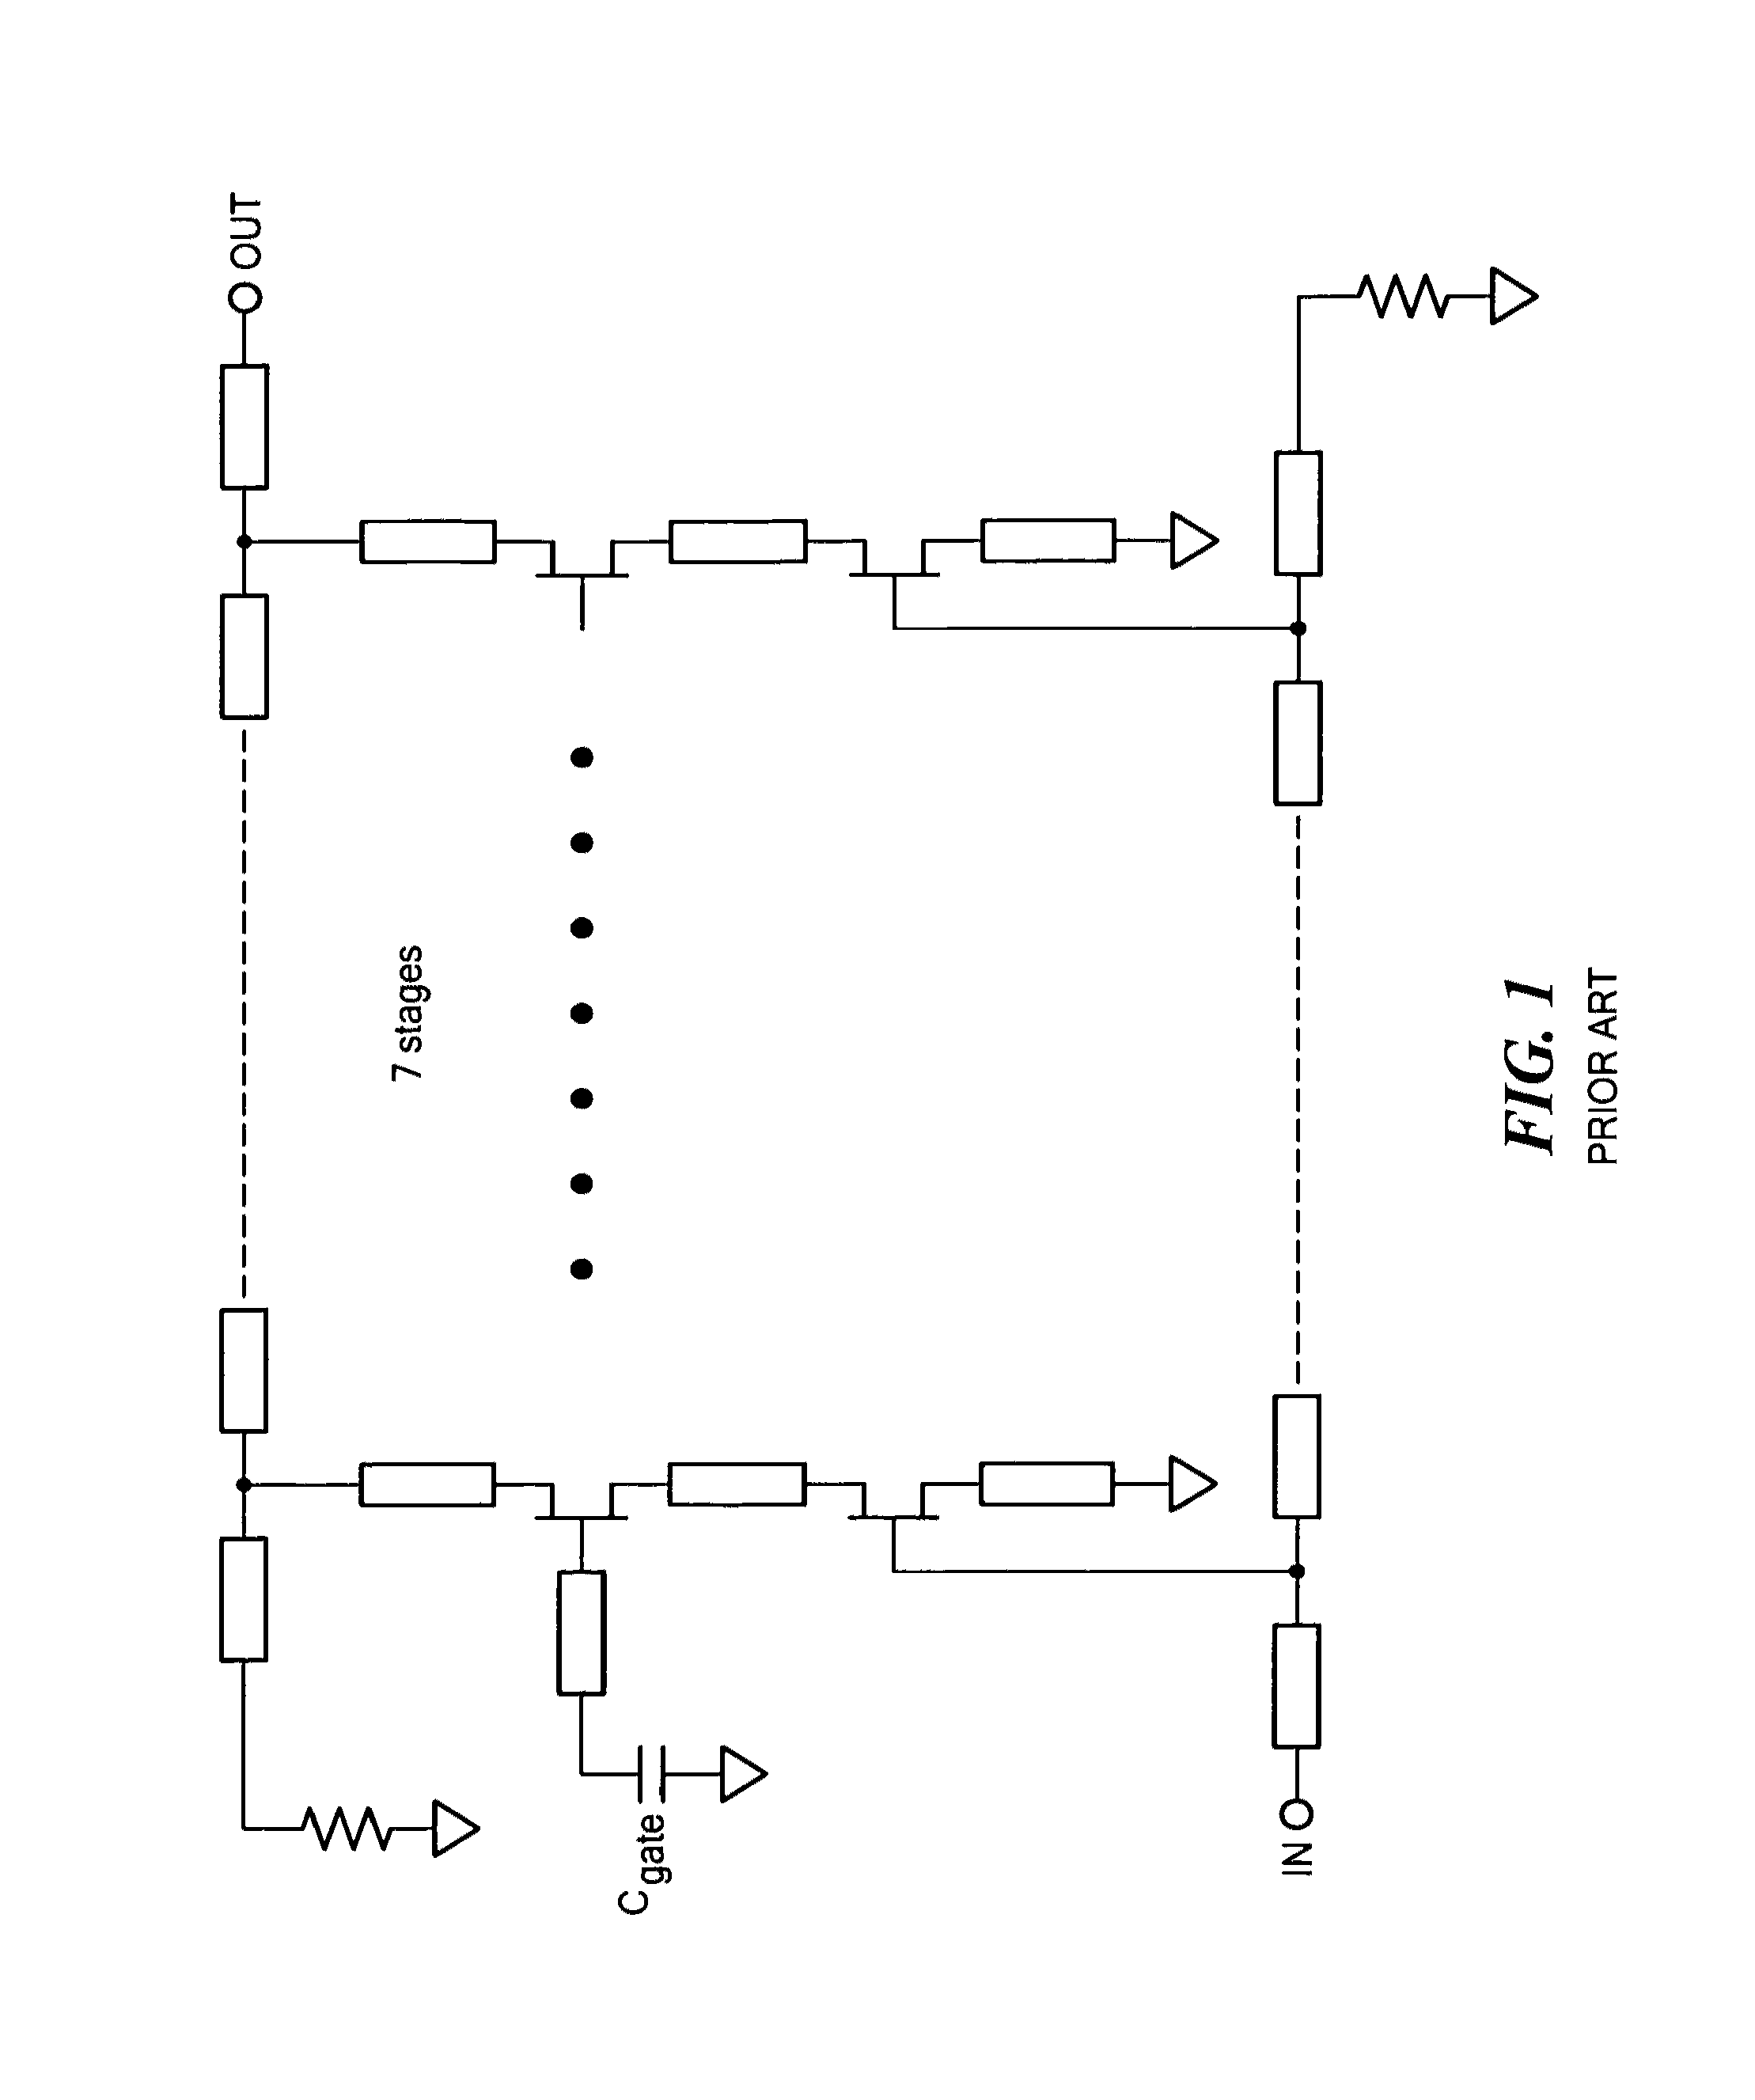 Distributed amplifier with improved stabilization